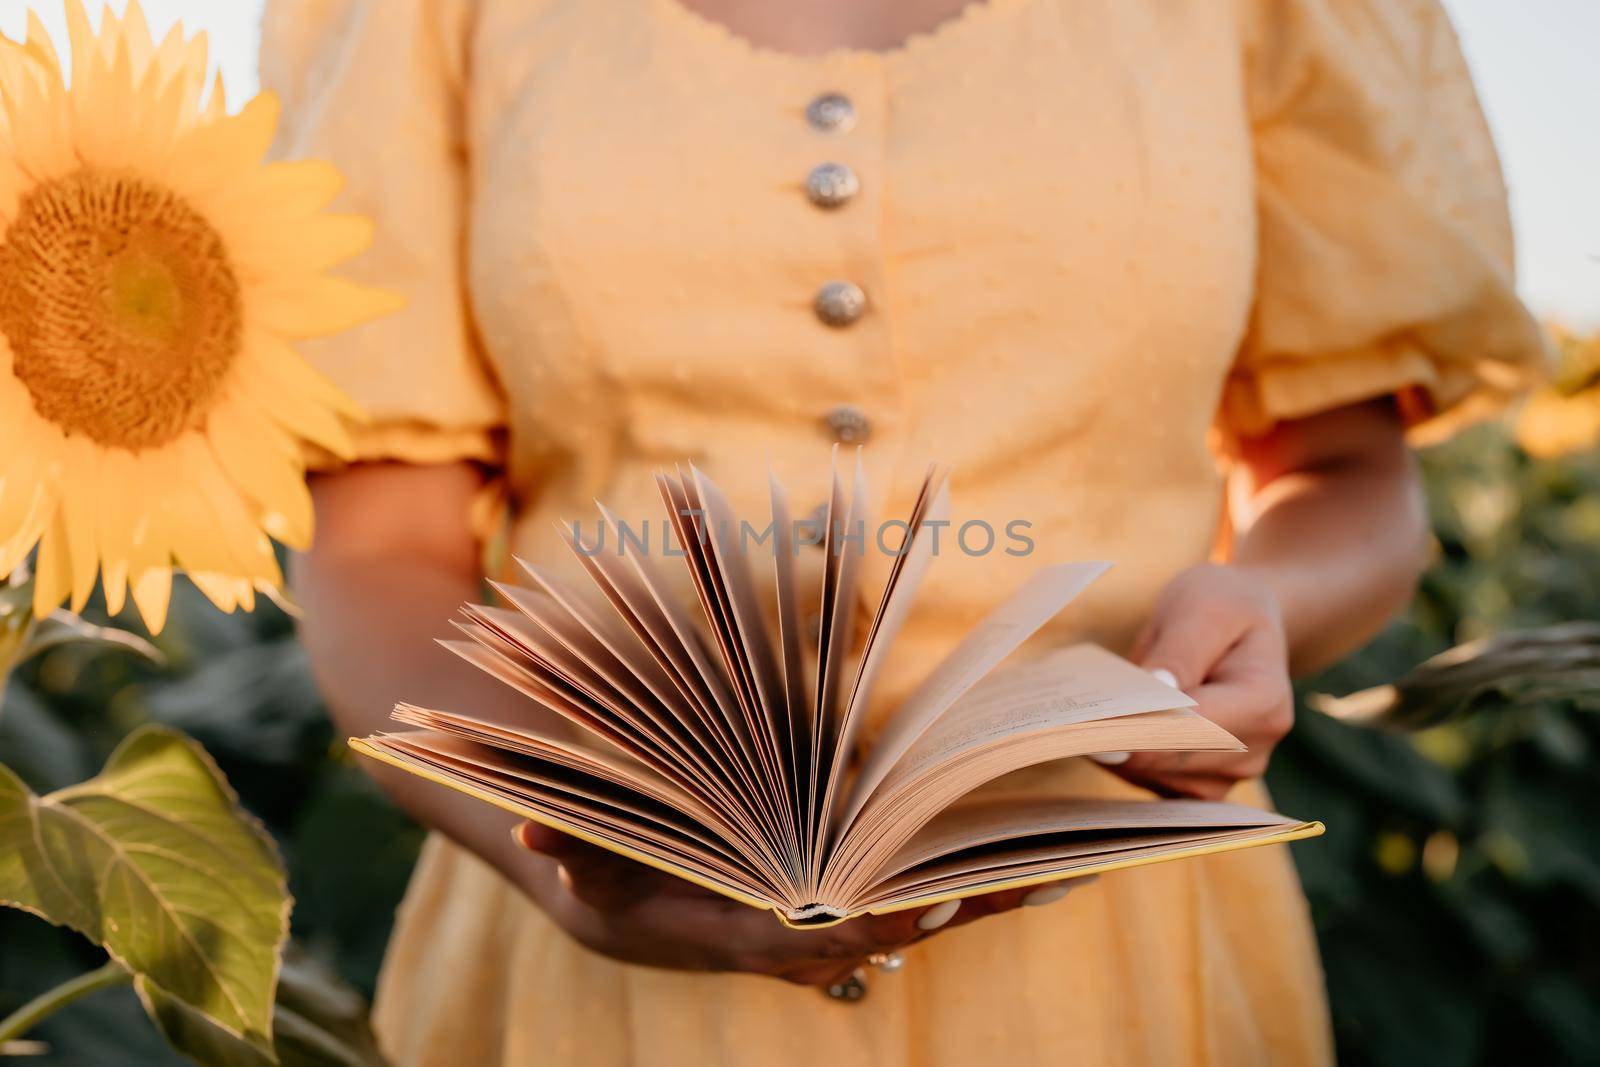 Woman flips through pages of old paper book on sunflowers field background. Aesthetics scene. Education, science, nature concept. High quality photo